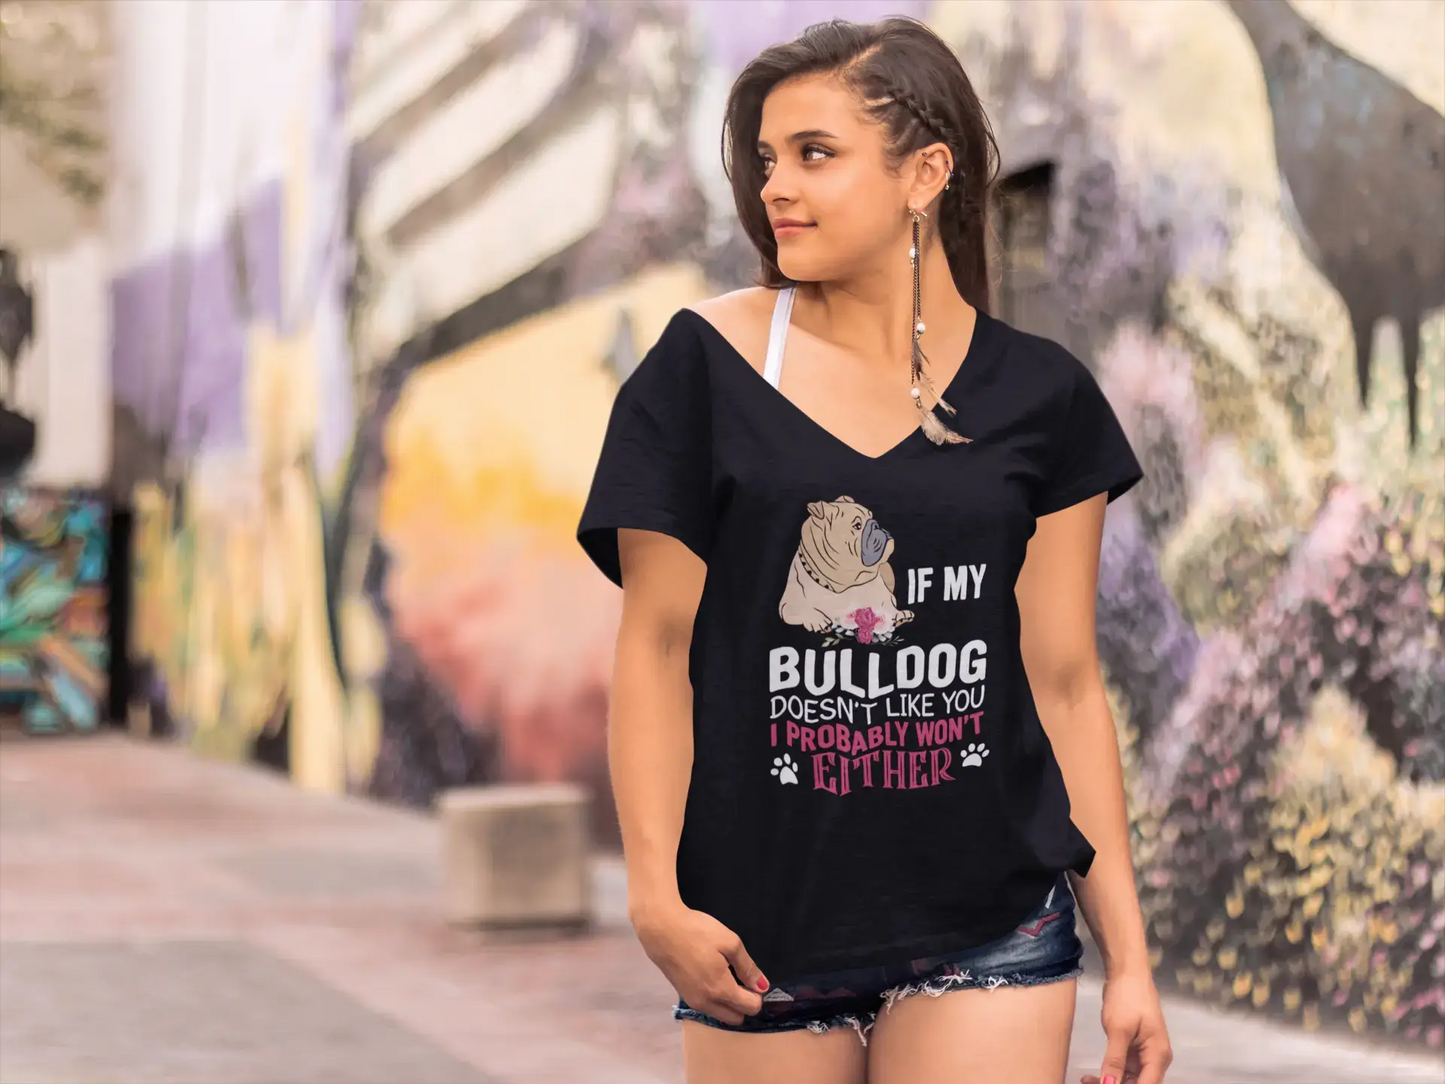 ULTRABASIC Women's T-Shirt If My Bulldog Doesn't Like You I Probably Won't Either - Funny Dog Quote